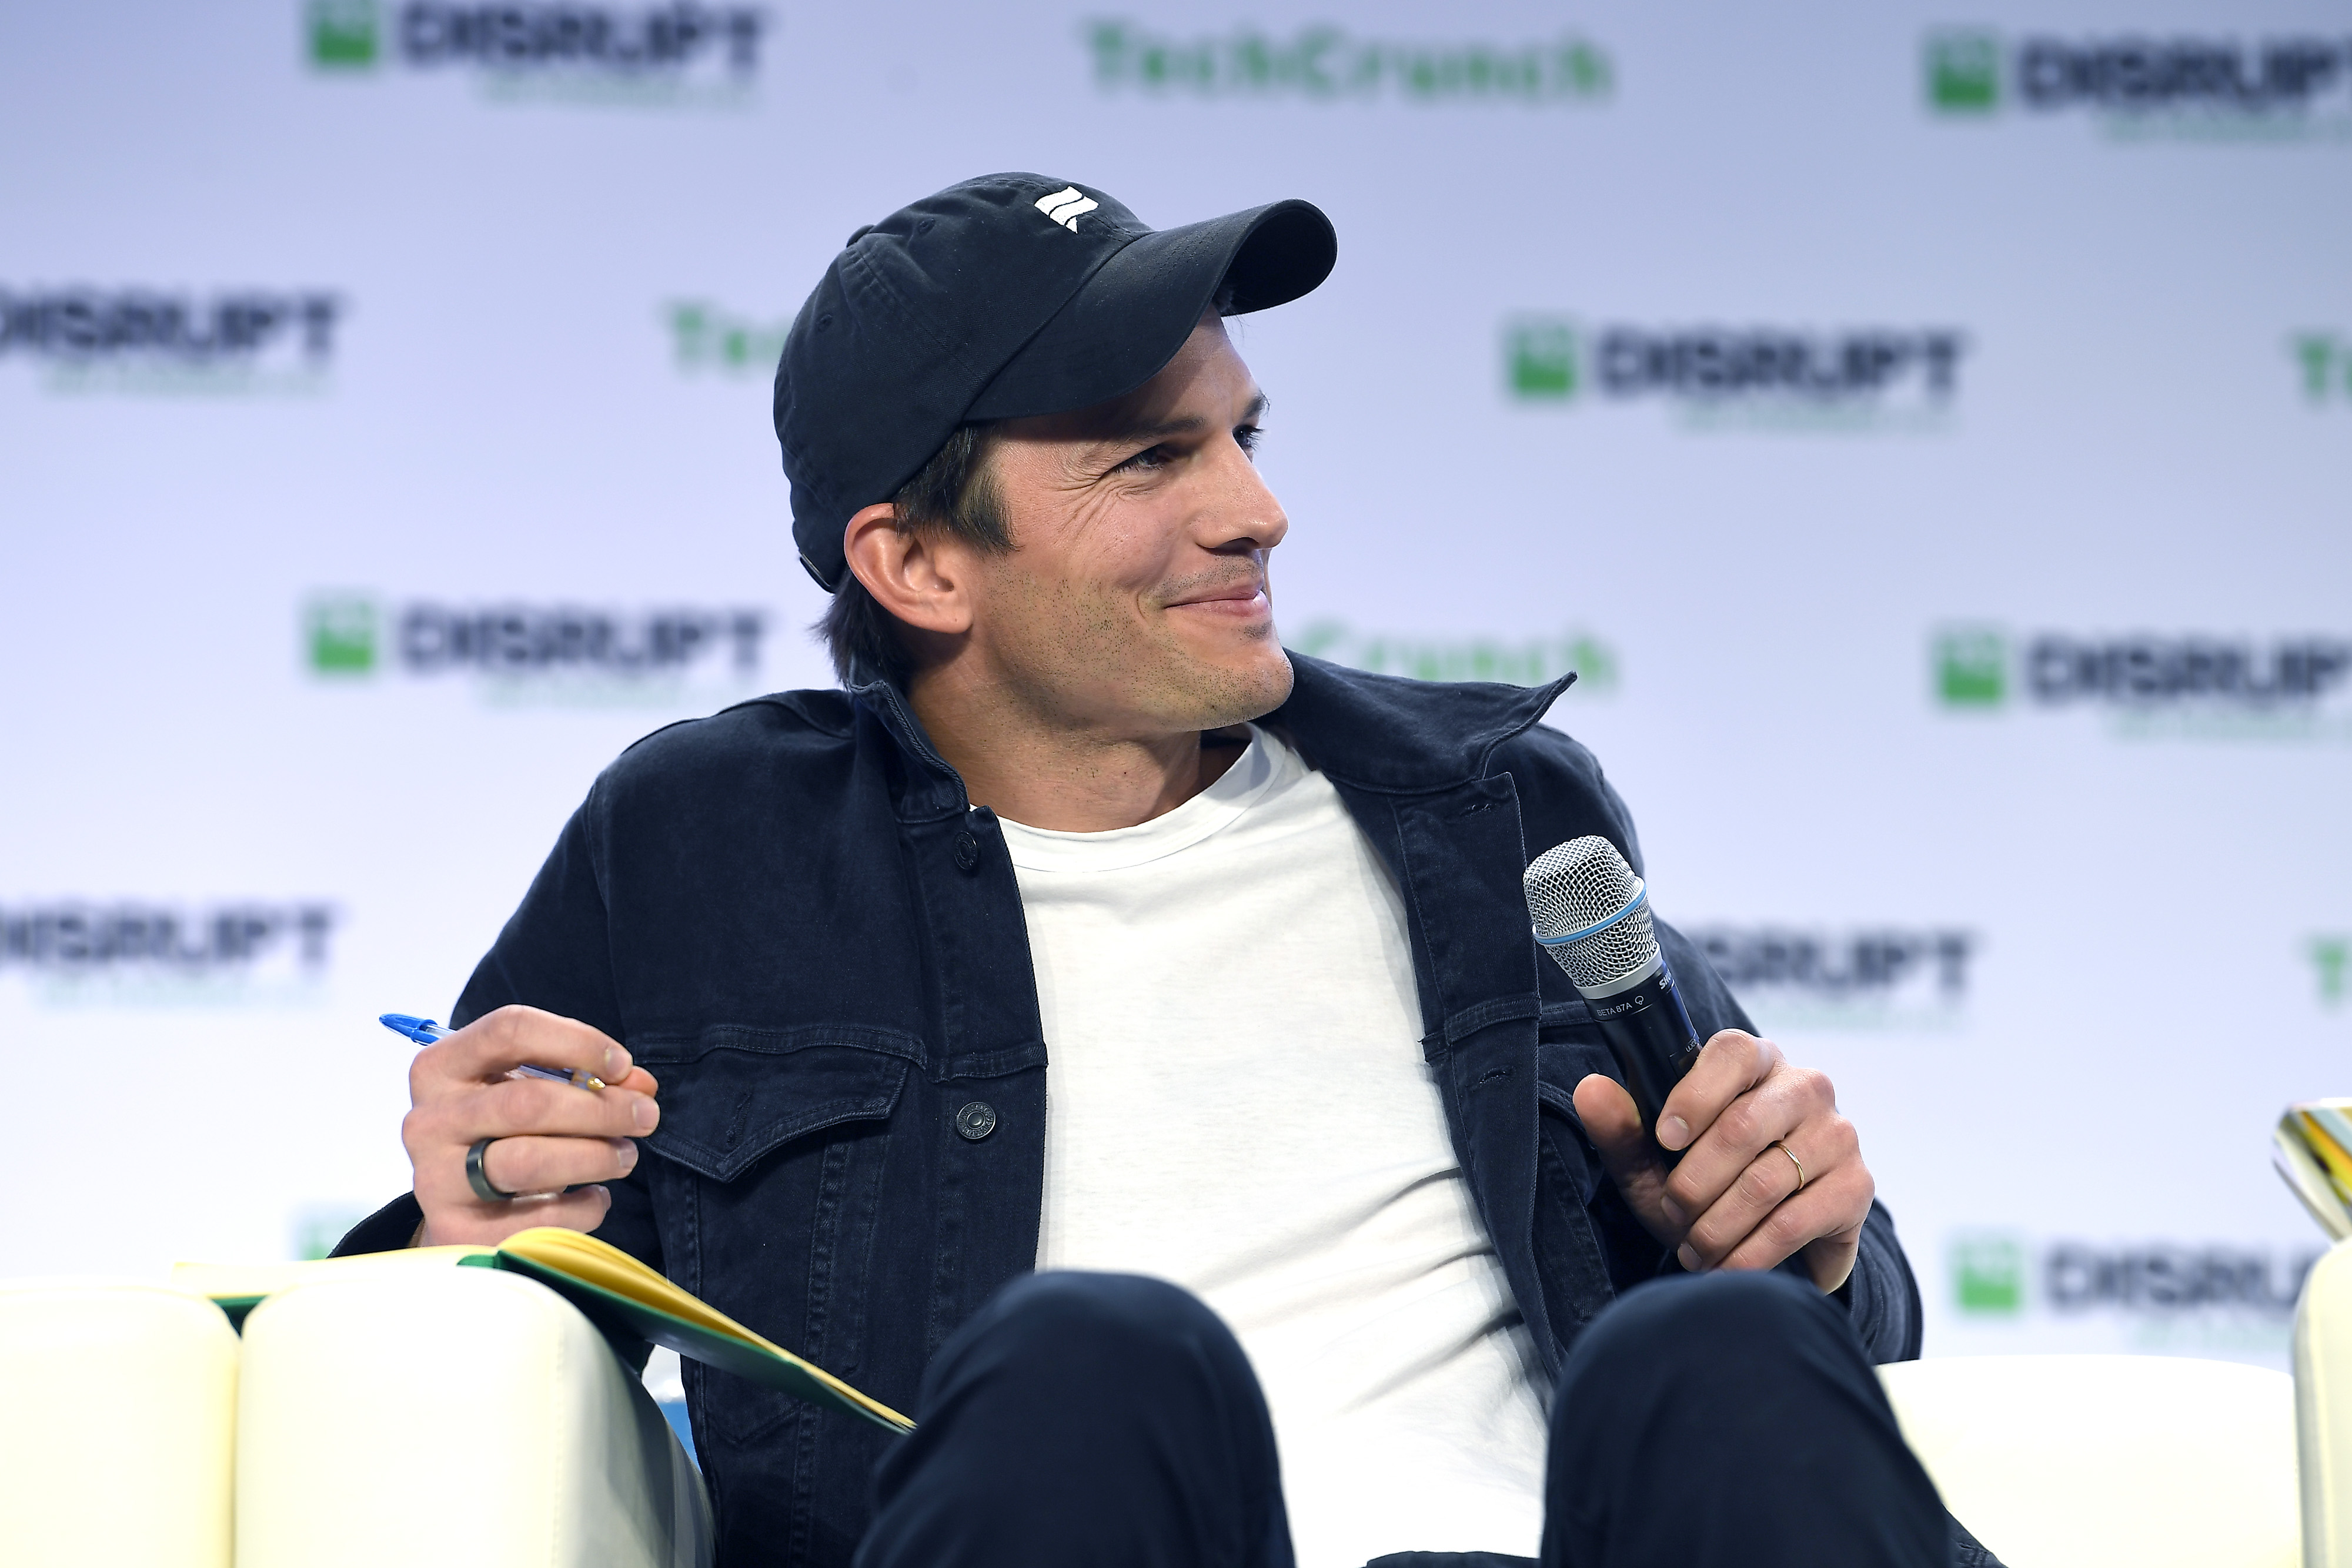 Ashton Kutcher speaks onstage during TechCrunch Disrupt San Francisco 2019 at Moscone Convention Center on October 04, 2019 in San Francisco, California. The actor's hygiene habits have come under scrutiny.